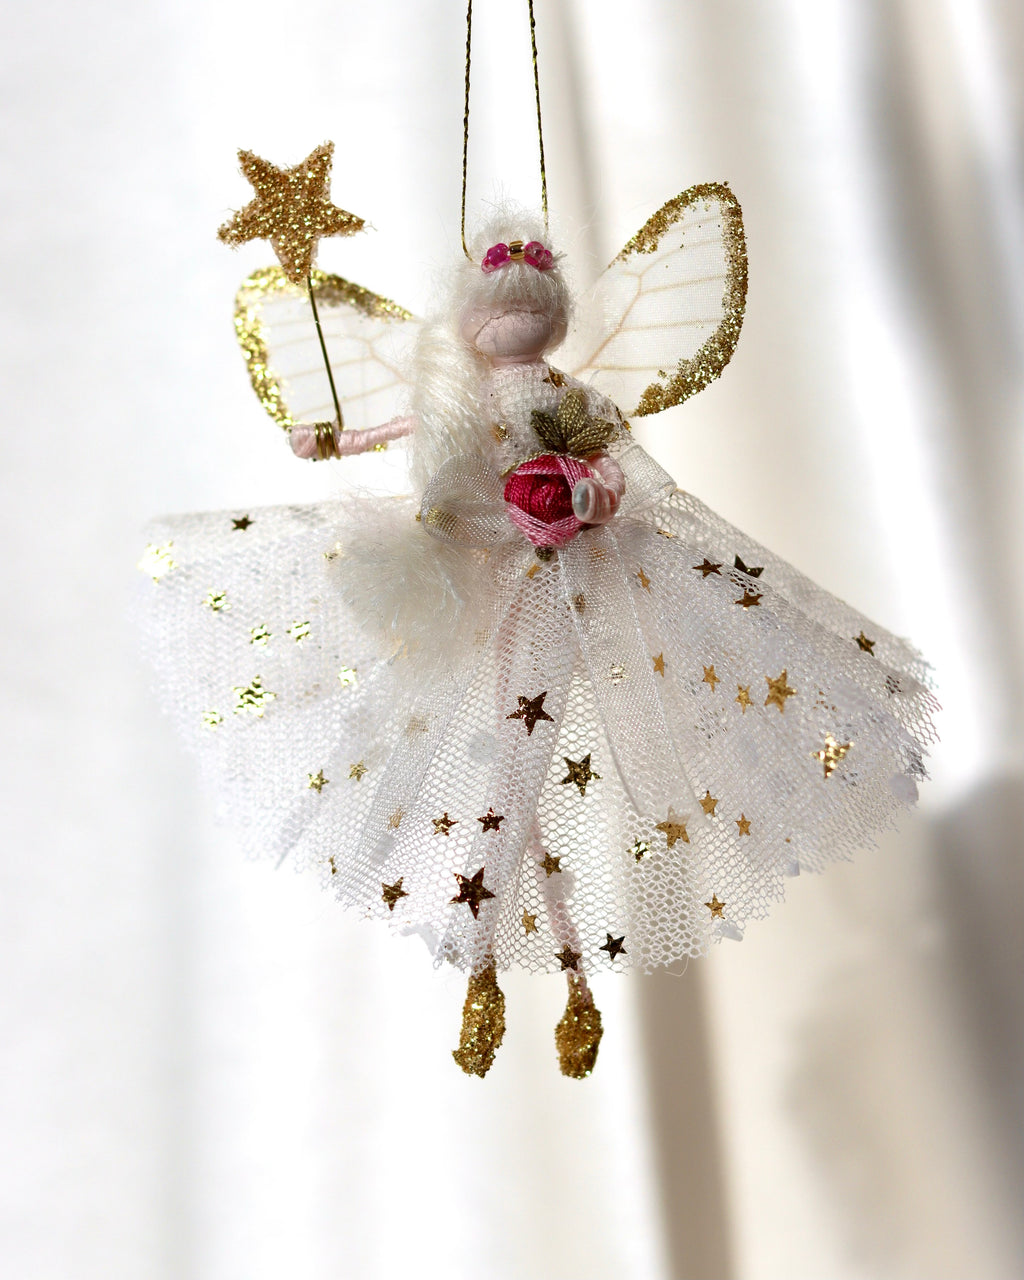 This little fairy is dressed in a Gold star and white polka dot gown. She has sashed her gown at the waist with an Organza ribbon and a little pink embroidered rose trim. She has little shoes dipped in glitter and of course, her glittered wand brings you never-ending memories!